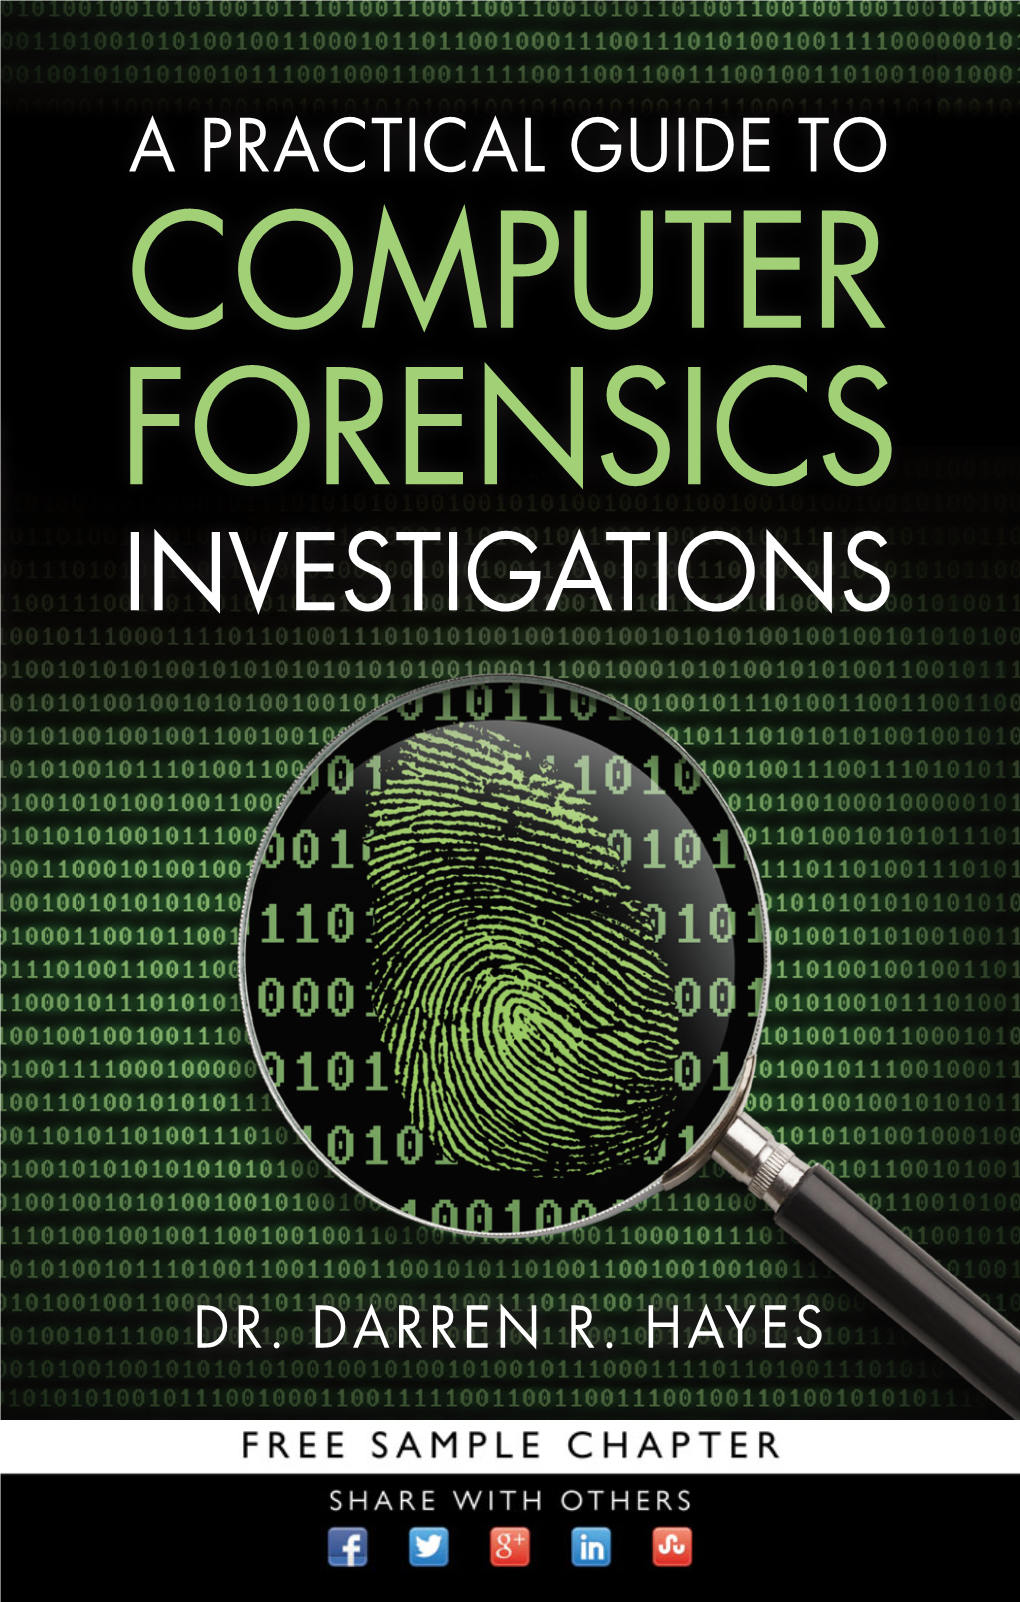 A Practical Guide to Computer Forensics Investigations